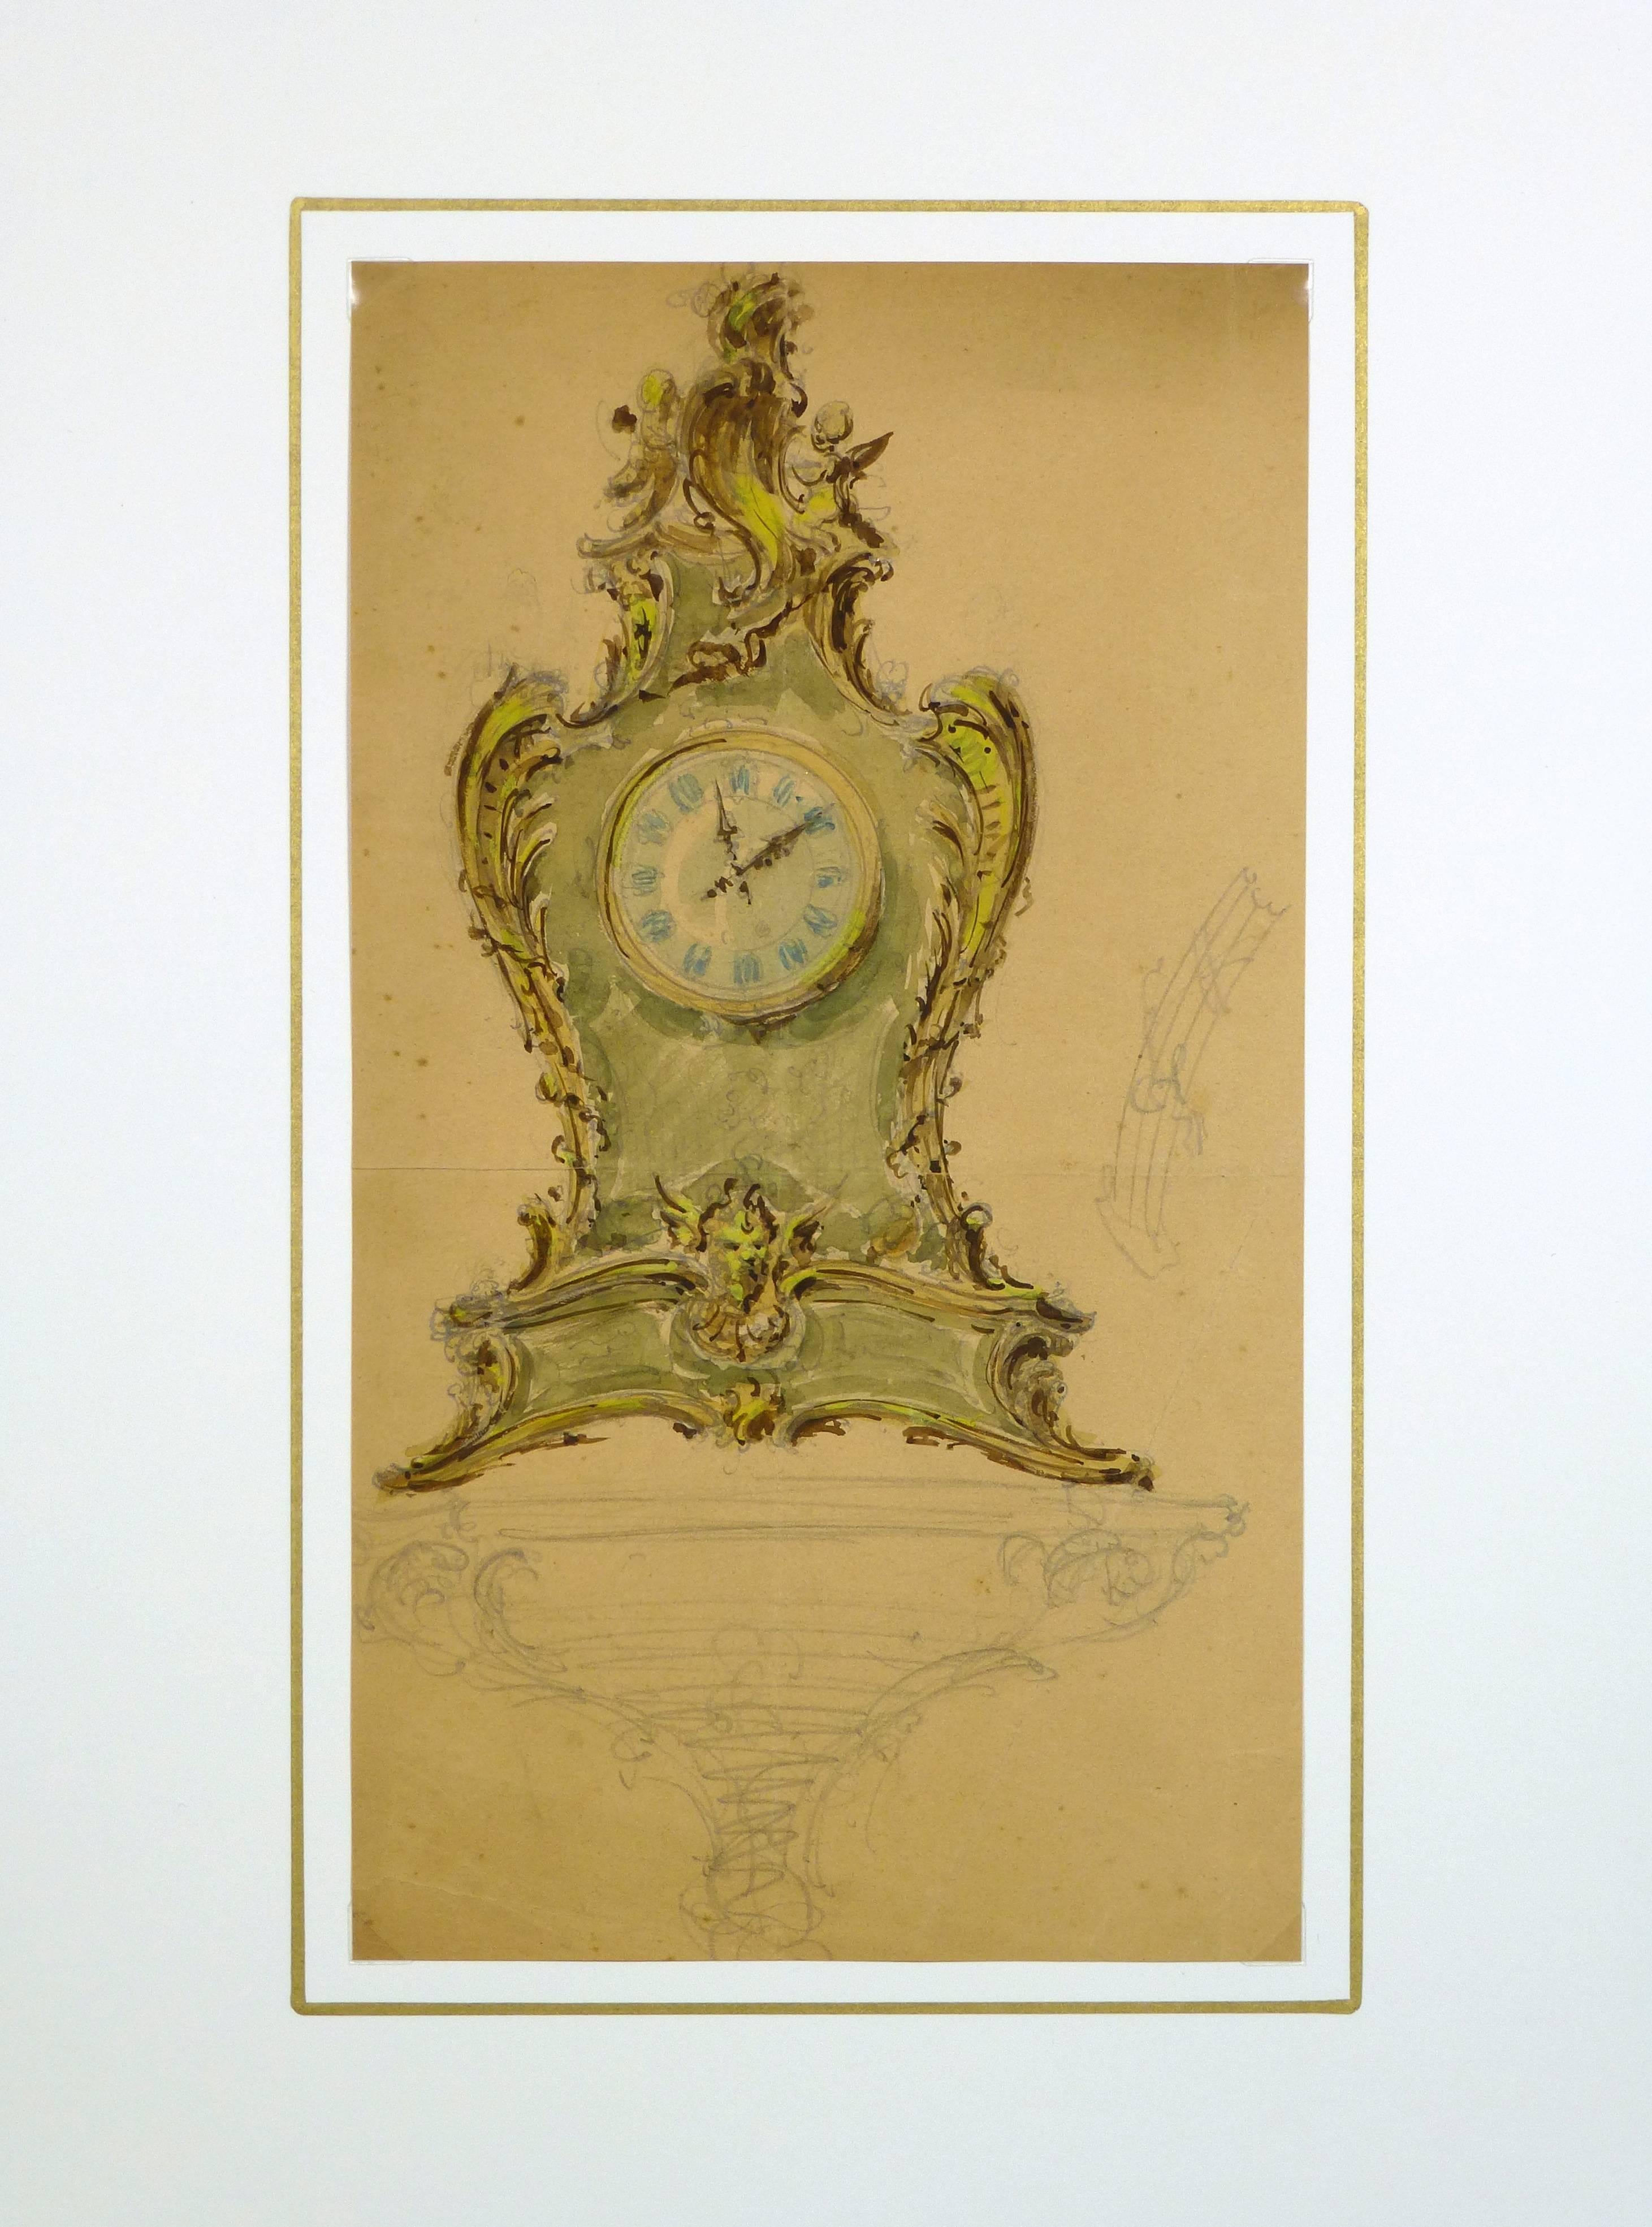 French watercolor and pencil of ornate clock, circa 1930.  

Original artwork on paper displayed on a white mat with a gold border. Archival plastic sleeve and Certificate of Authenticity included. Artwork, 12